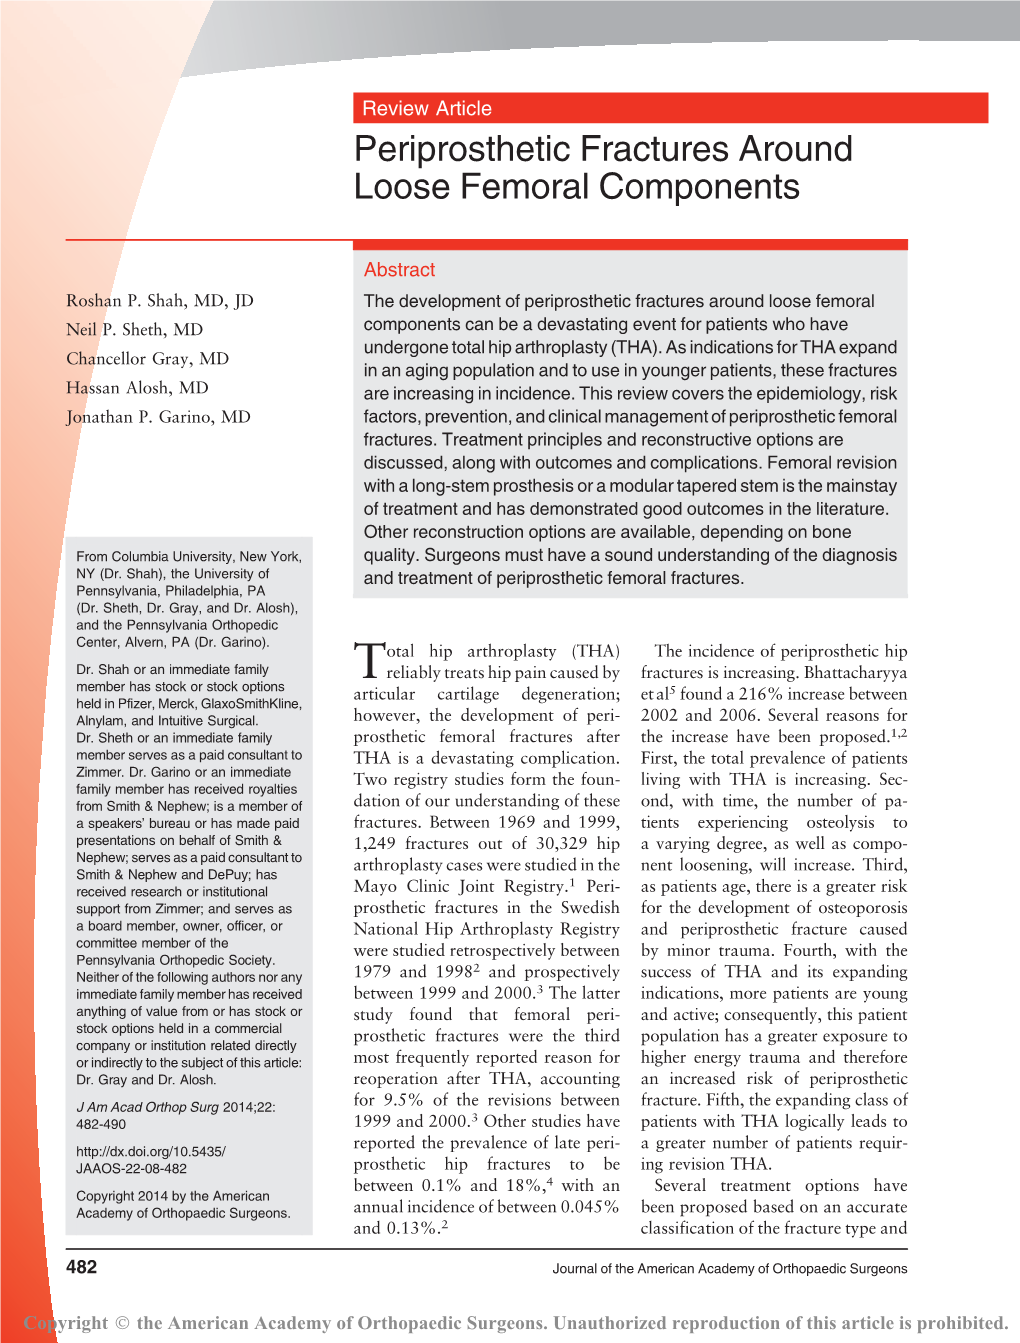 Periprosthetic Fractures Around Loose Femoral Components